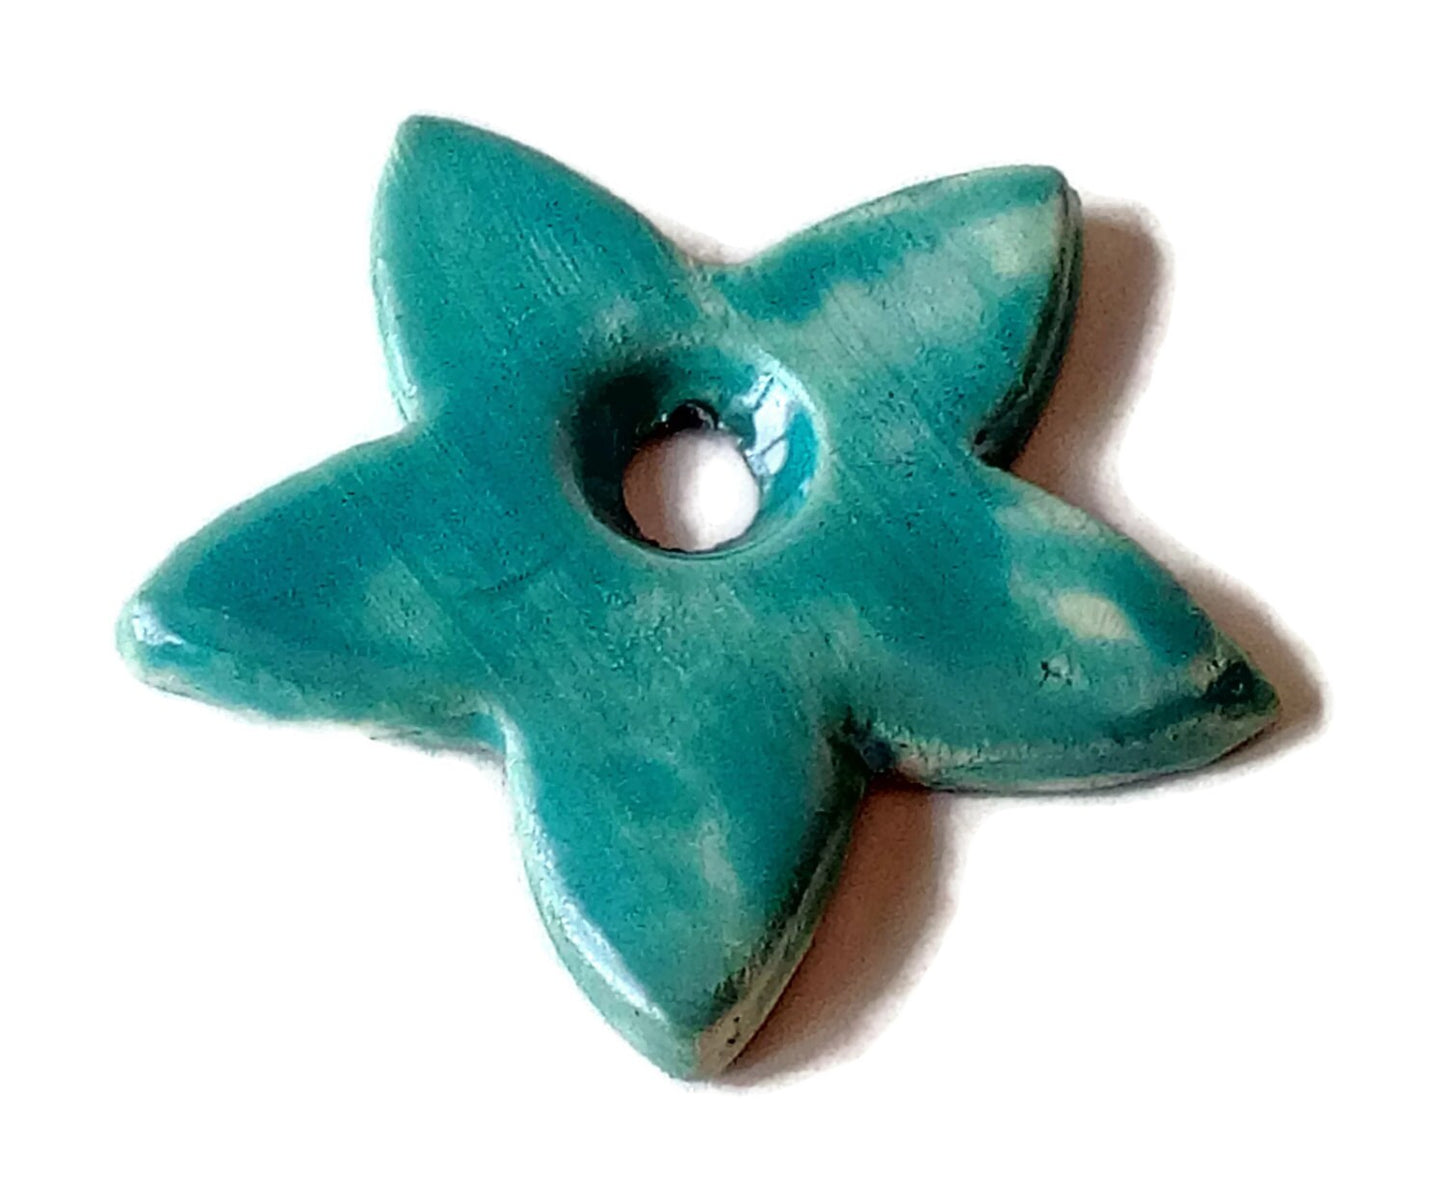 Unique Clay Charms For Unique Jewelry Making, Abstract Handmade Ceramic, Cool Random Large Star Pendant Necklace - Ceramica Ana Rafael